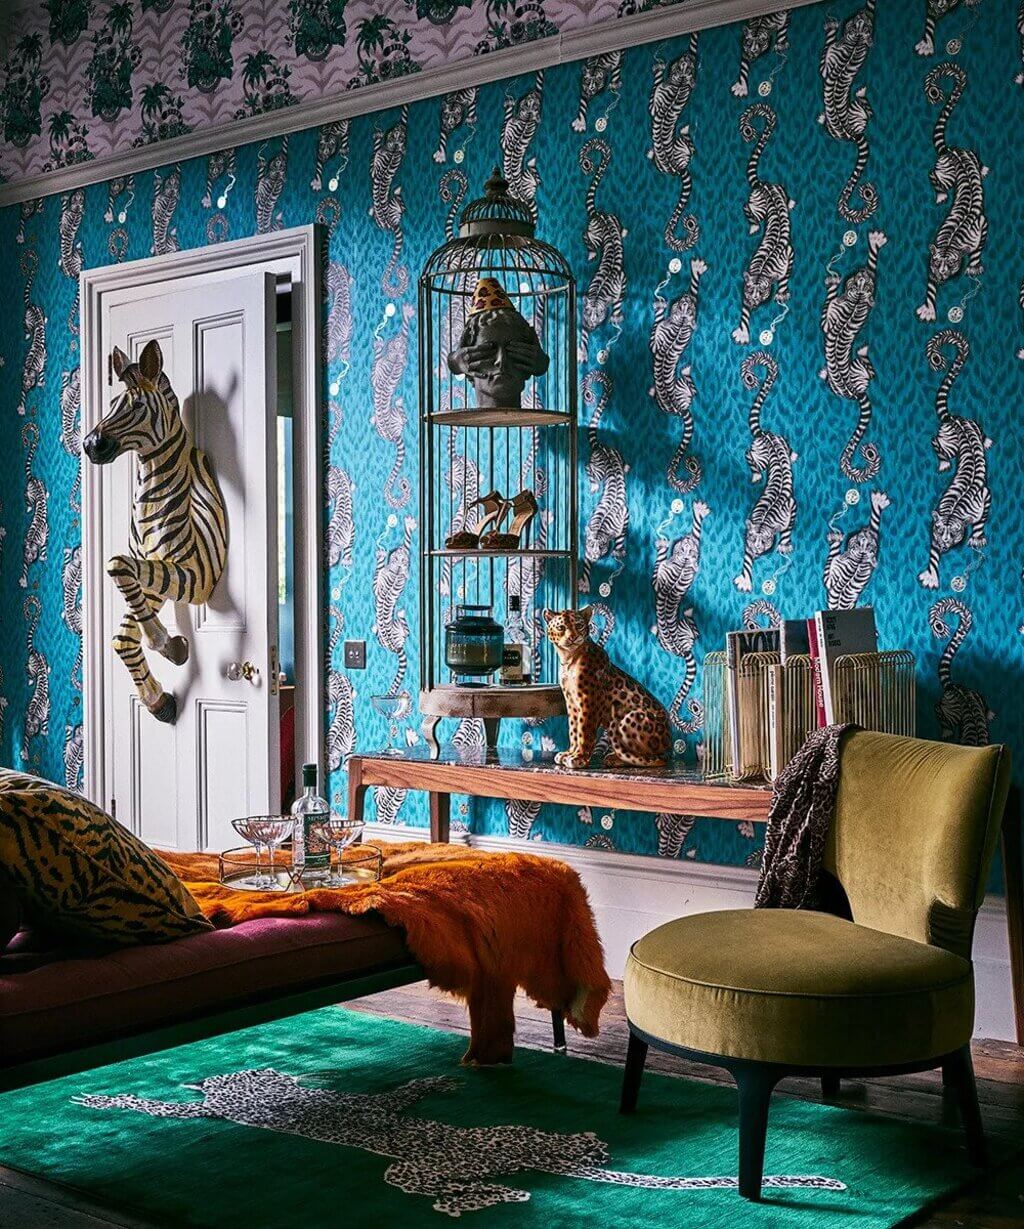 A living room with a zebra print wallpaper and a birdcage
